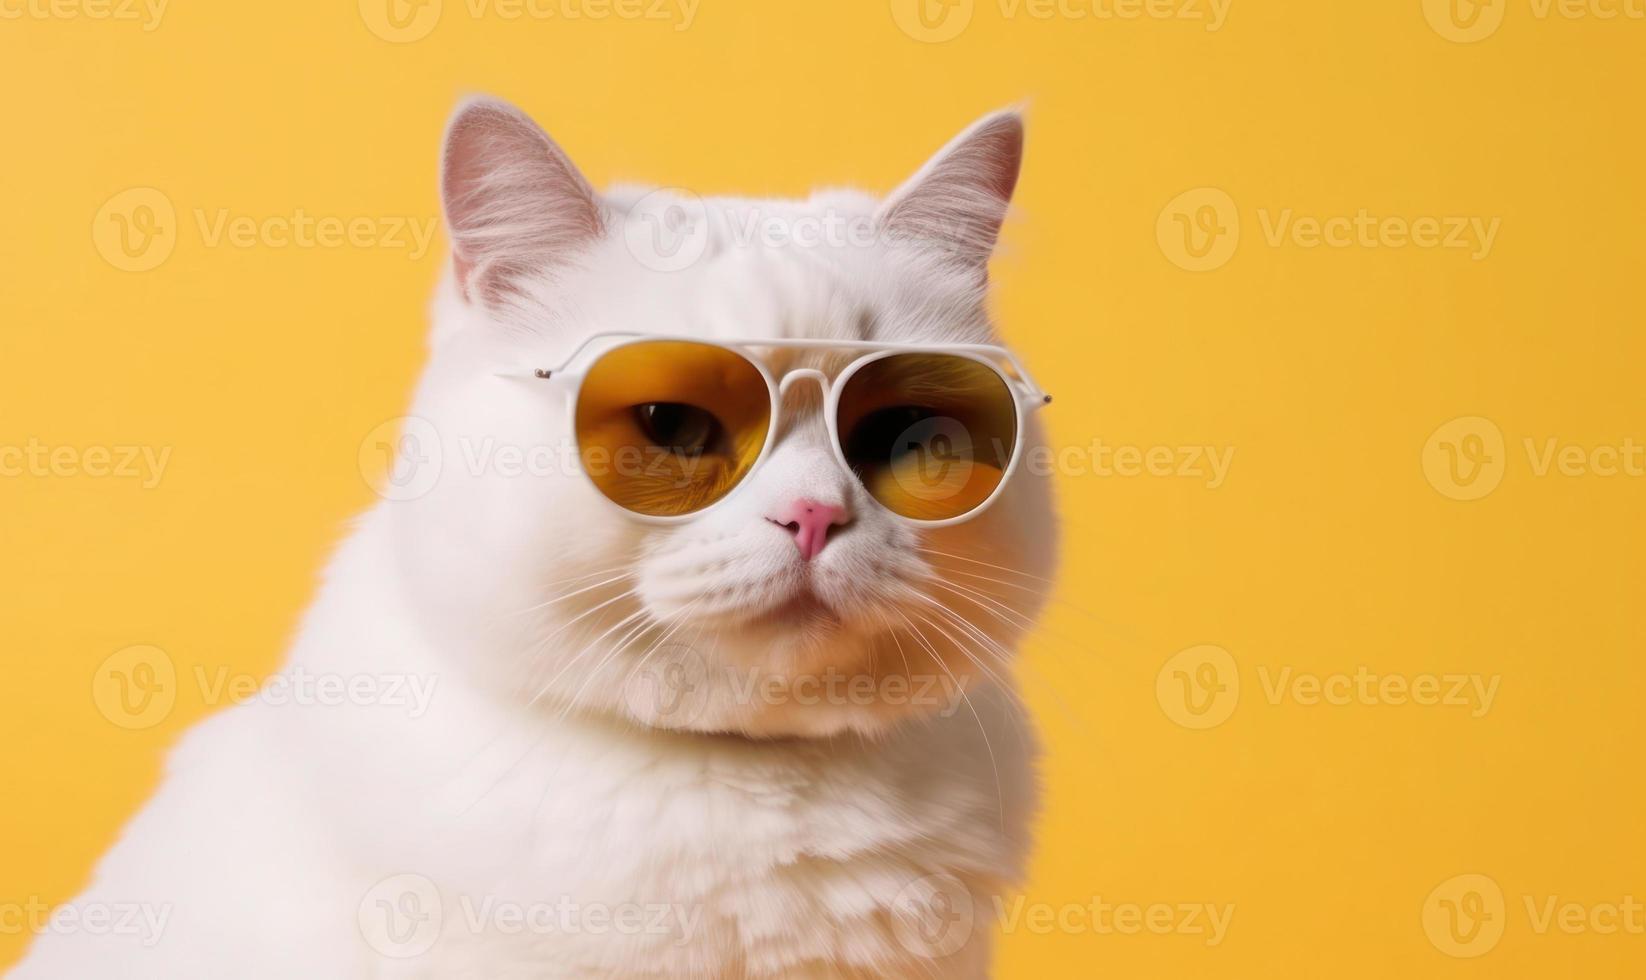 Portrait of funny cat wearing sunglasses on yellow background photo